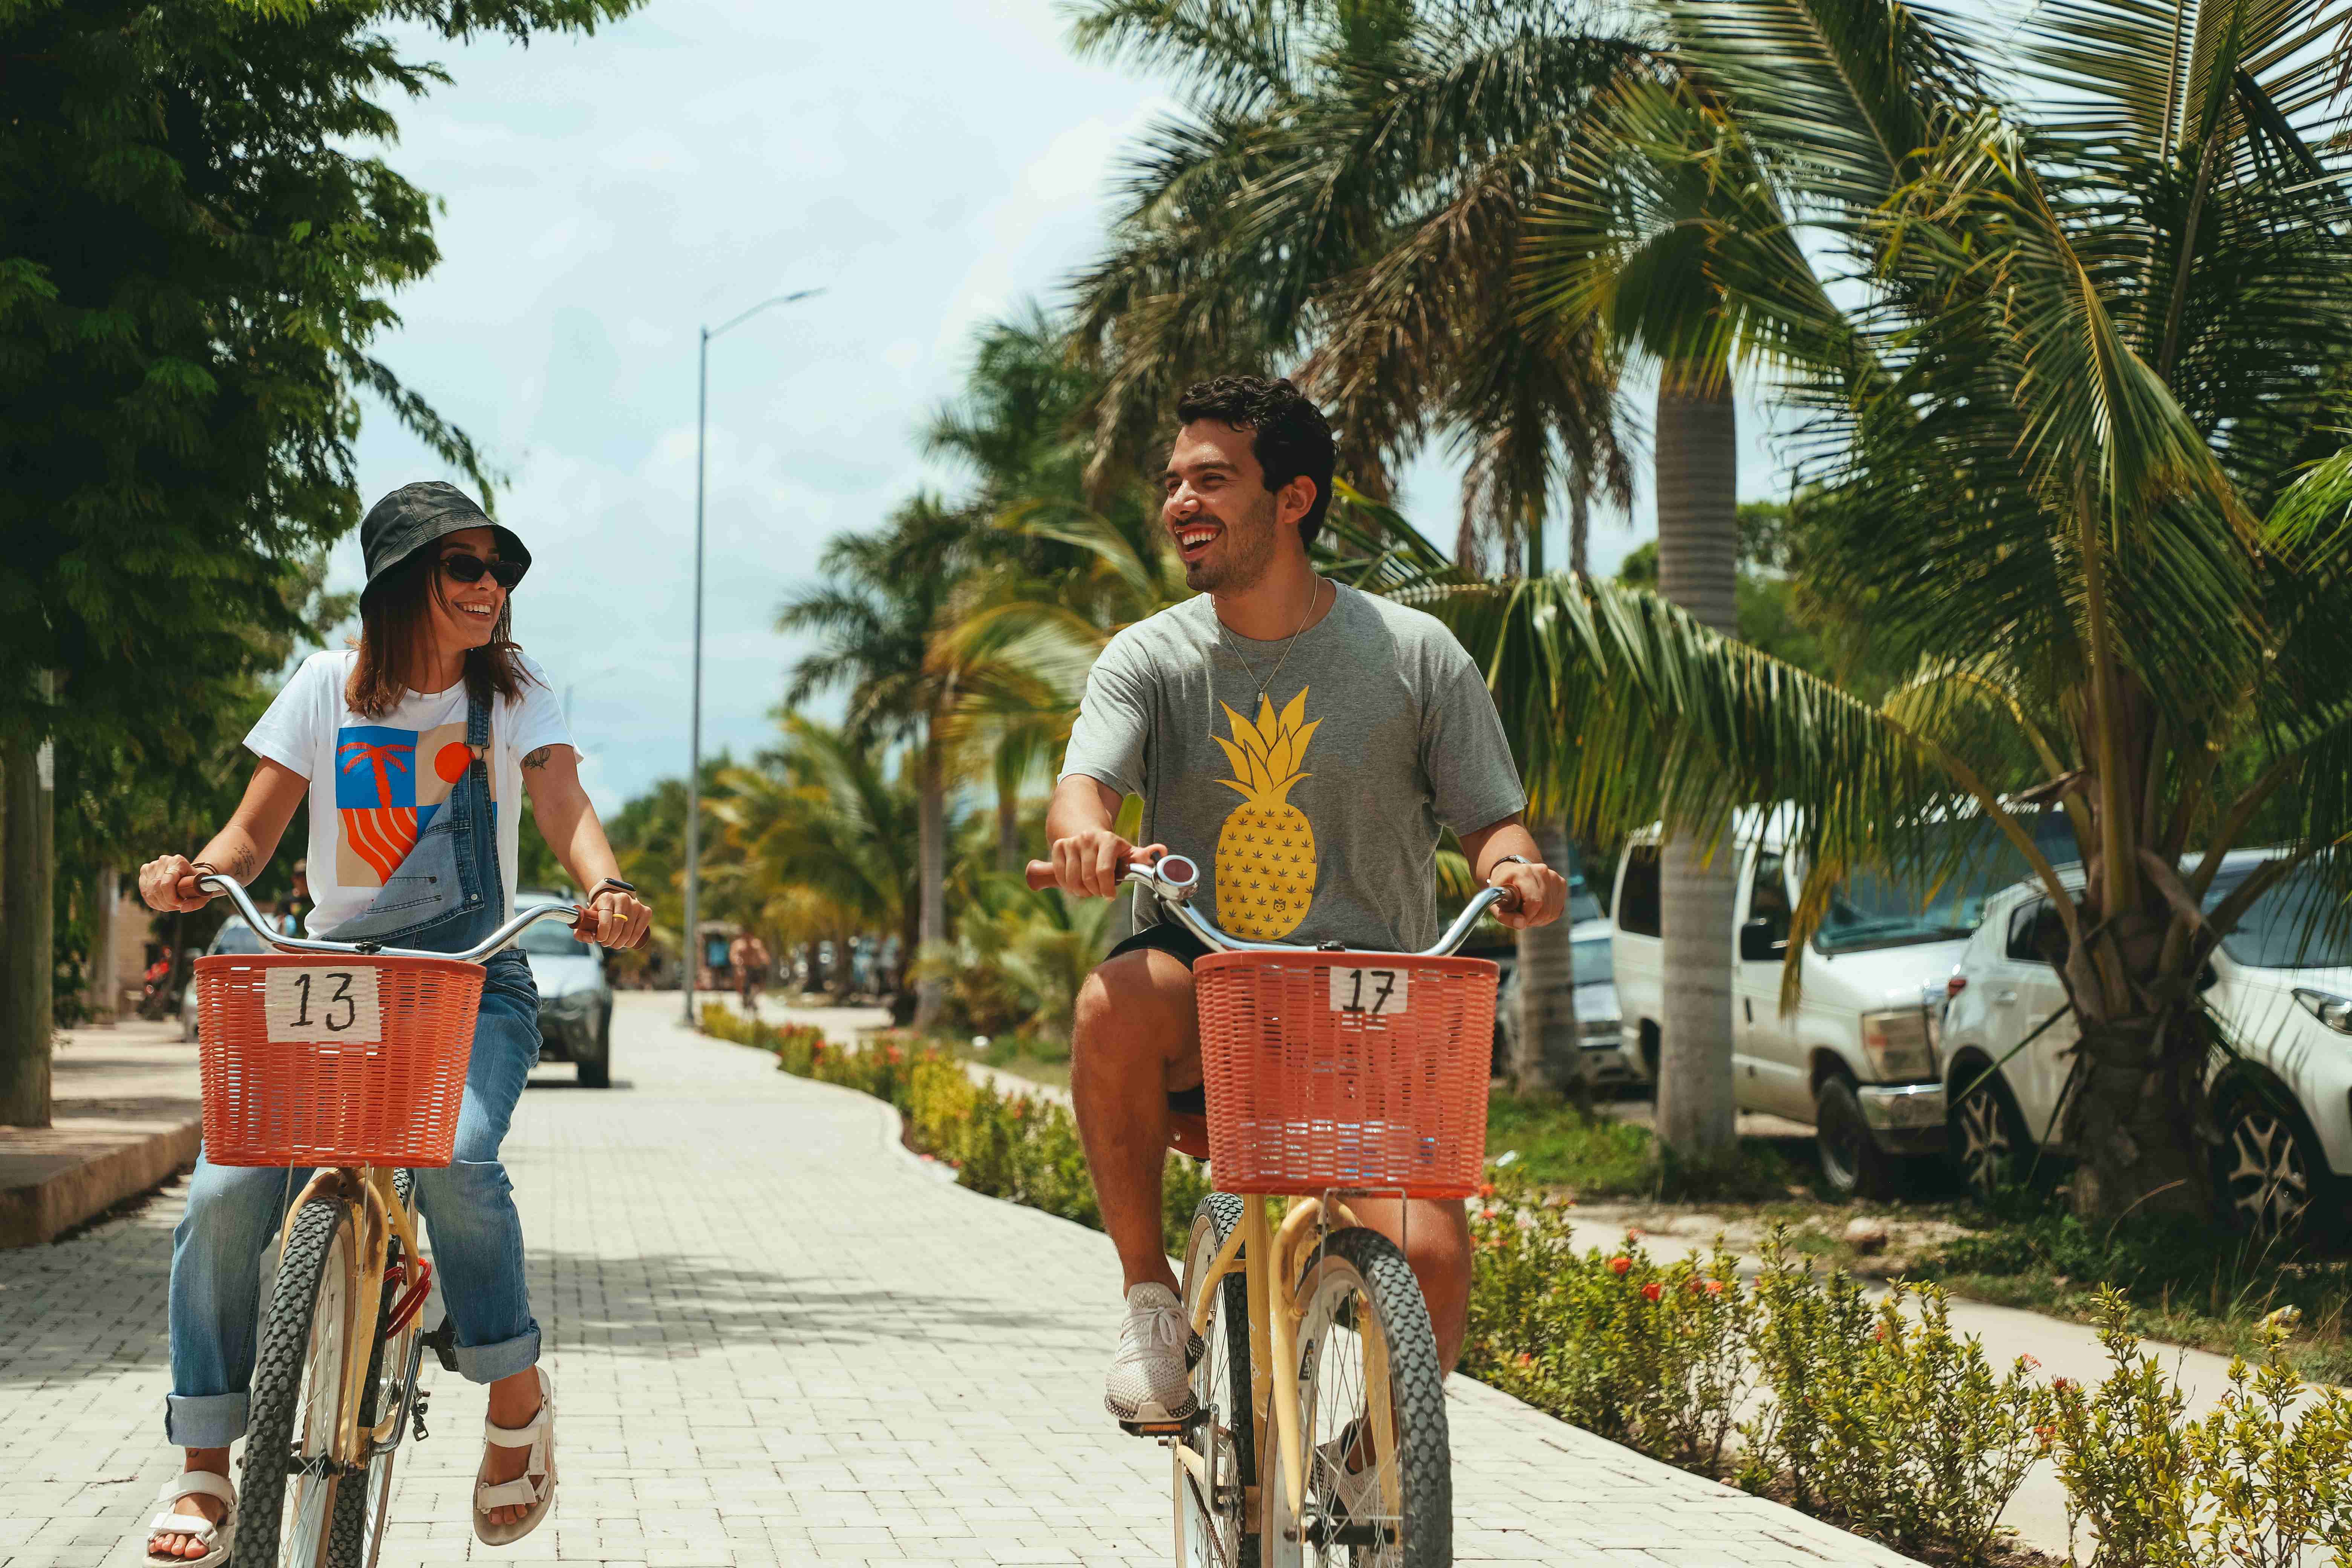 Mayan Monkey, The Monkey Membership, Membership, Vacation, Longstay, Locations, Discounts, Late Checkin, Affordable price, Stay, Travel, Adventure, Explore, Cancun, Tulum, Los Cabos, Cabo, Experience, Souvenir, Member, Breakfast, Laundry Service, Bike Rental